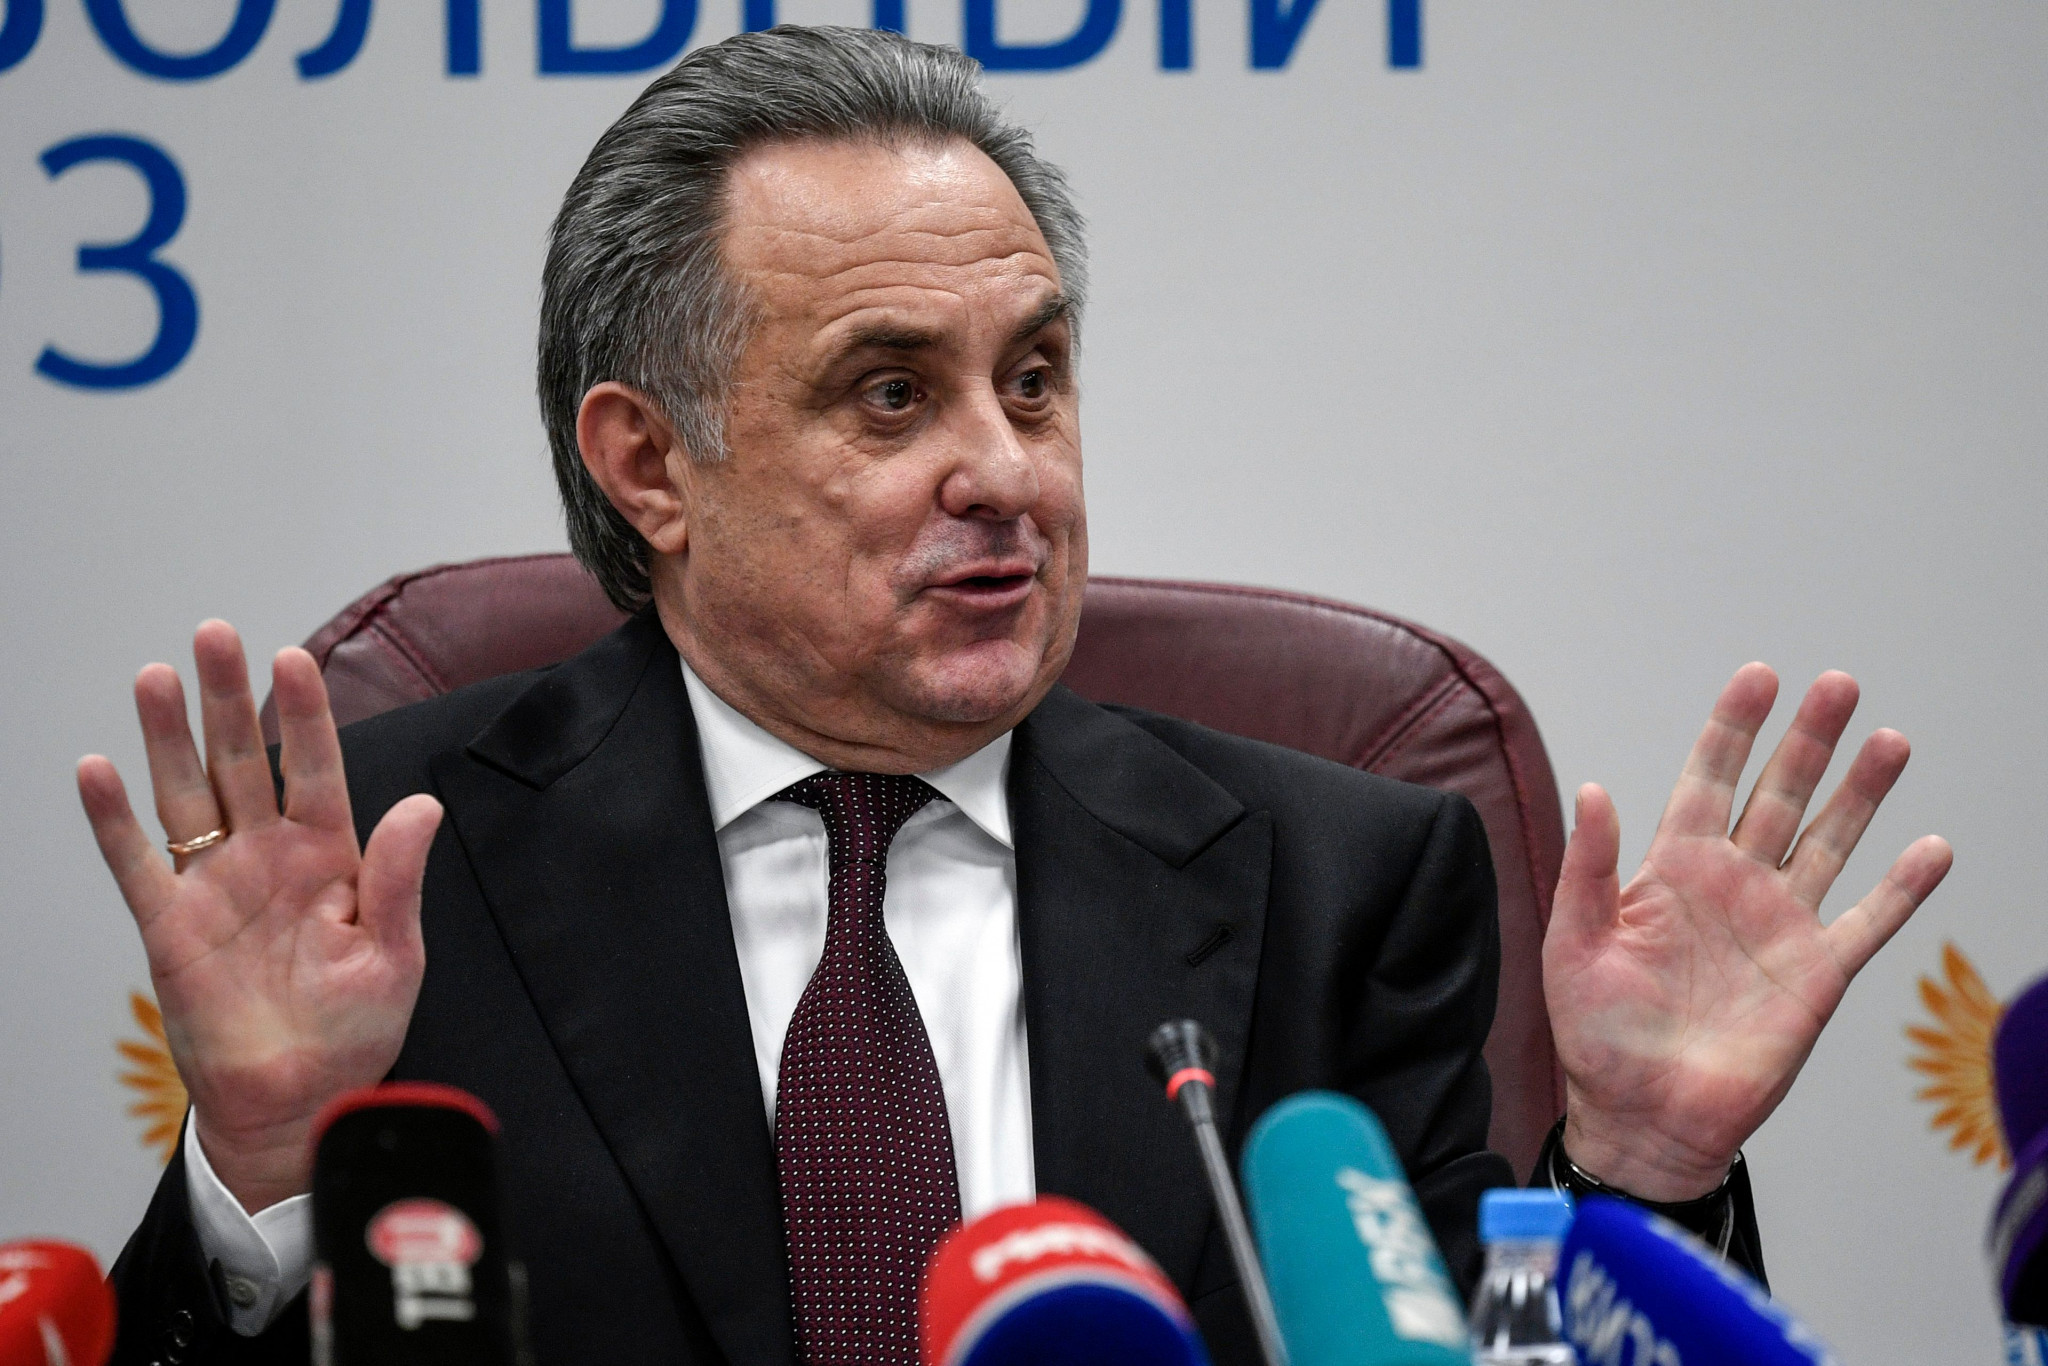 Though it has never been proven, as Sports Minister at the time Vitaly Mutko has been accused of being responsible for the Russian doping scandal ©Getty Images